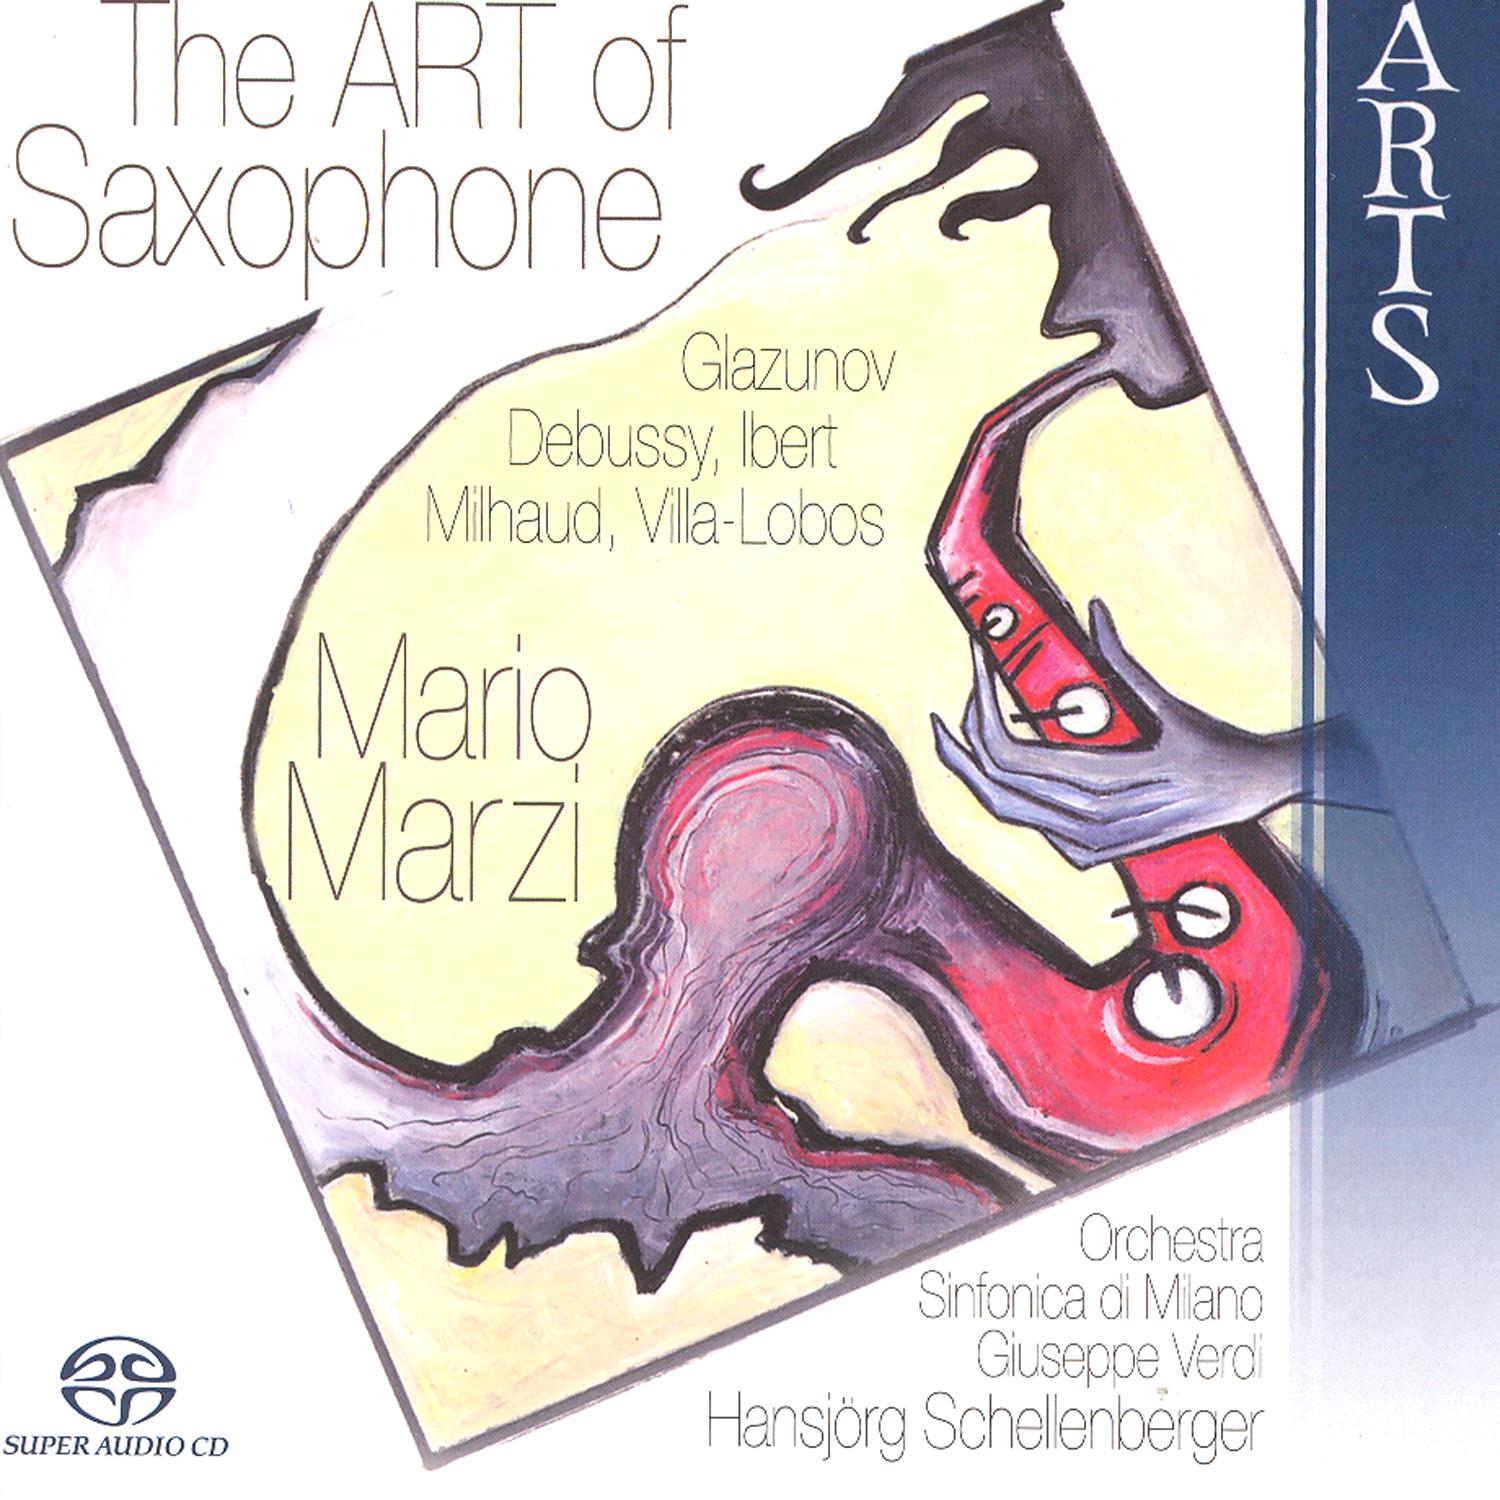 Concerto in E flat major for alto saxophone and strings op. 109: Andante